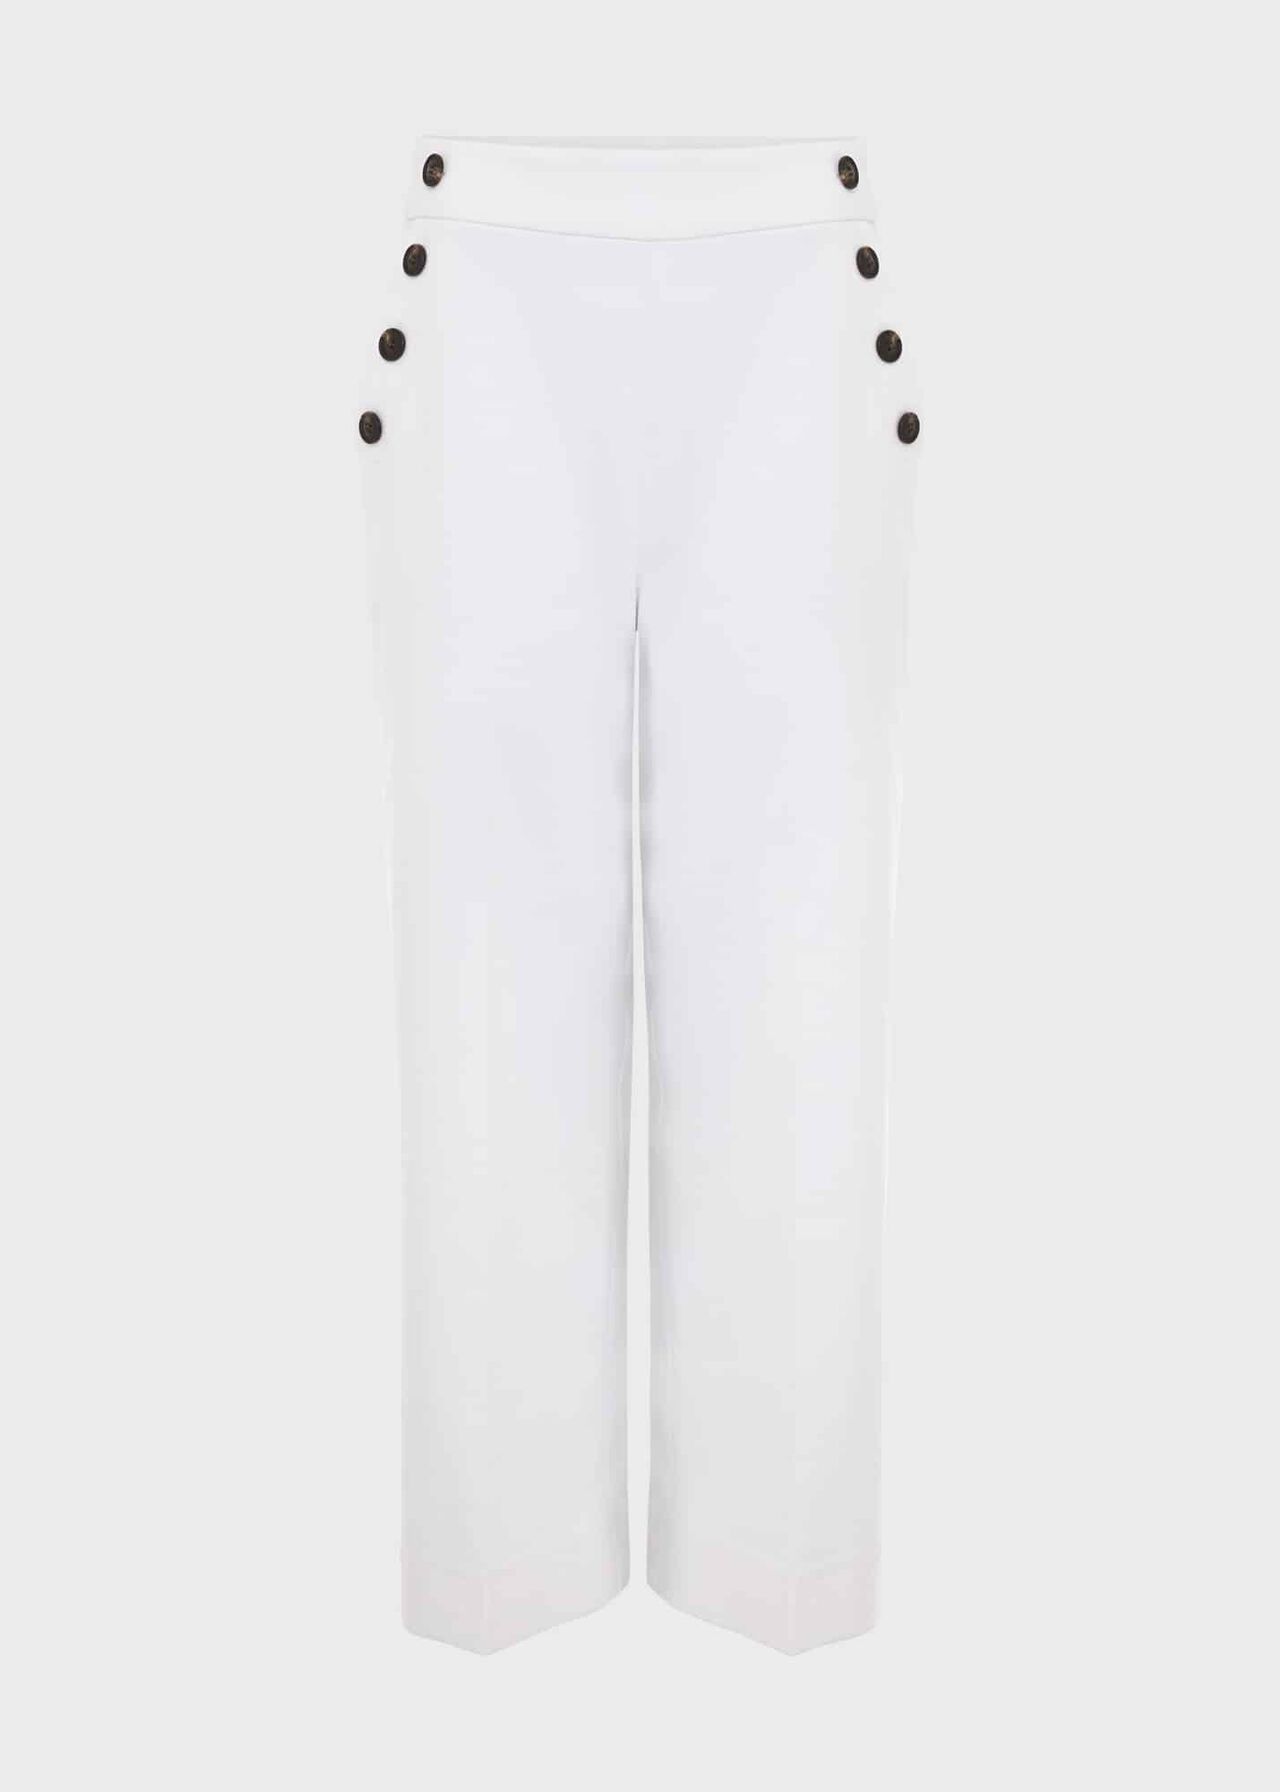 Petite Simone Crop Trousers With Cotton, White, hi-res